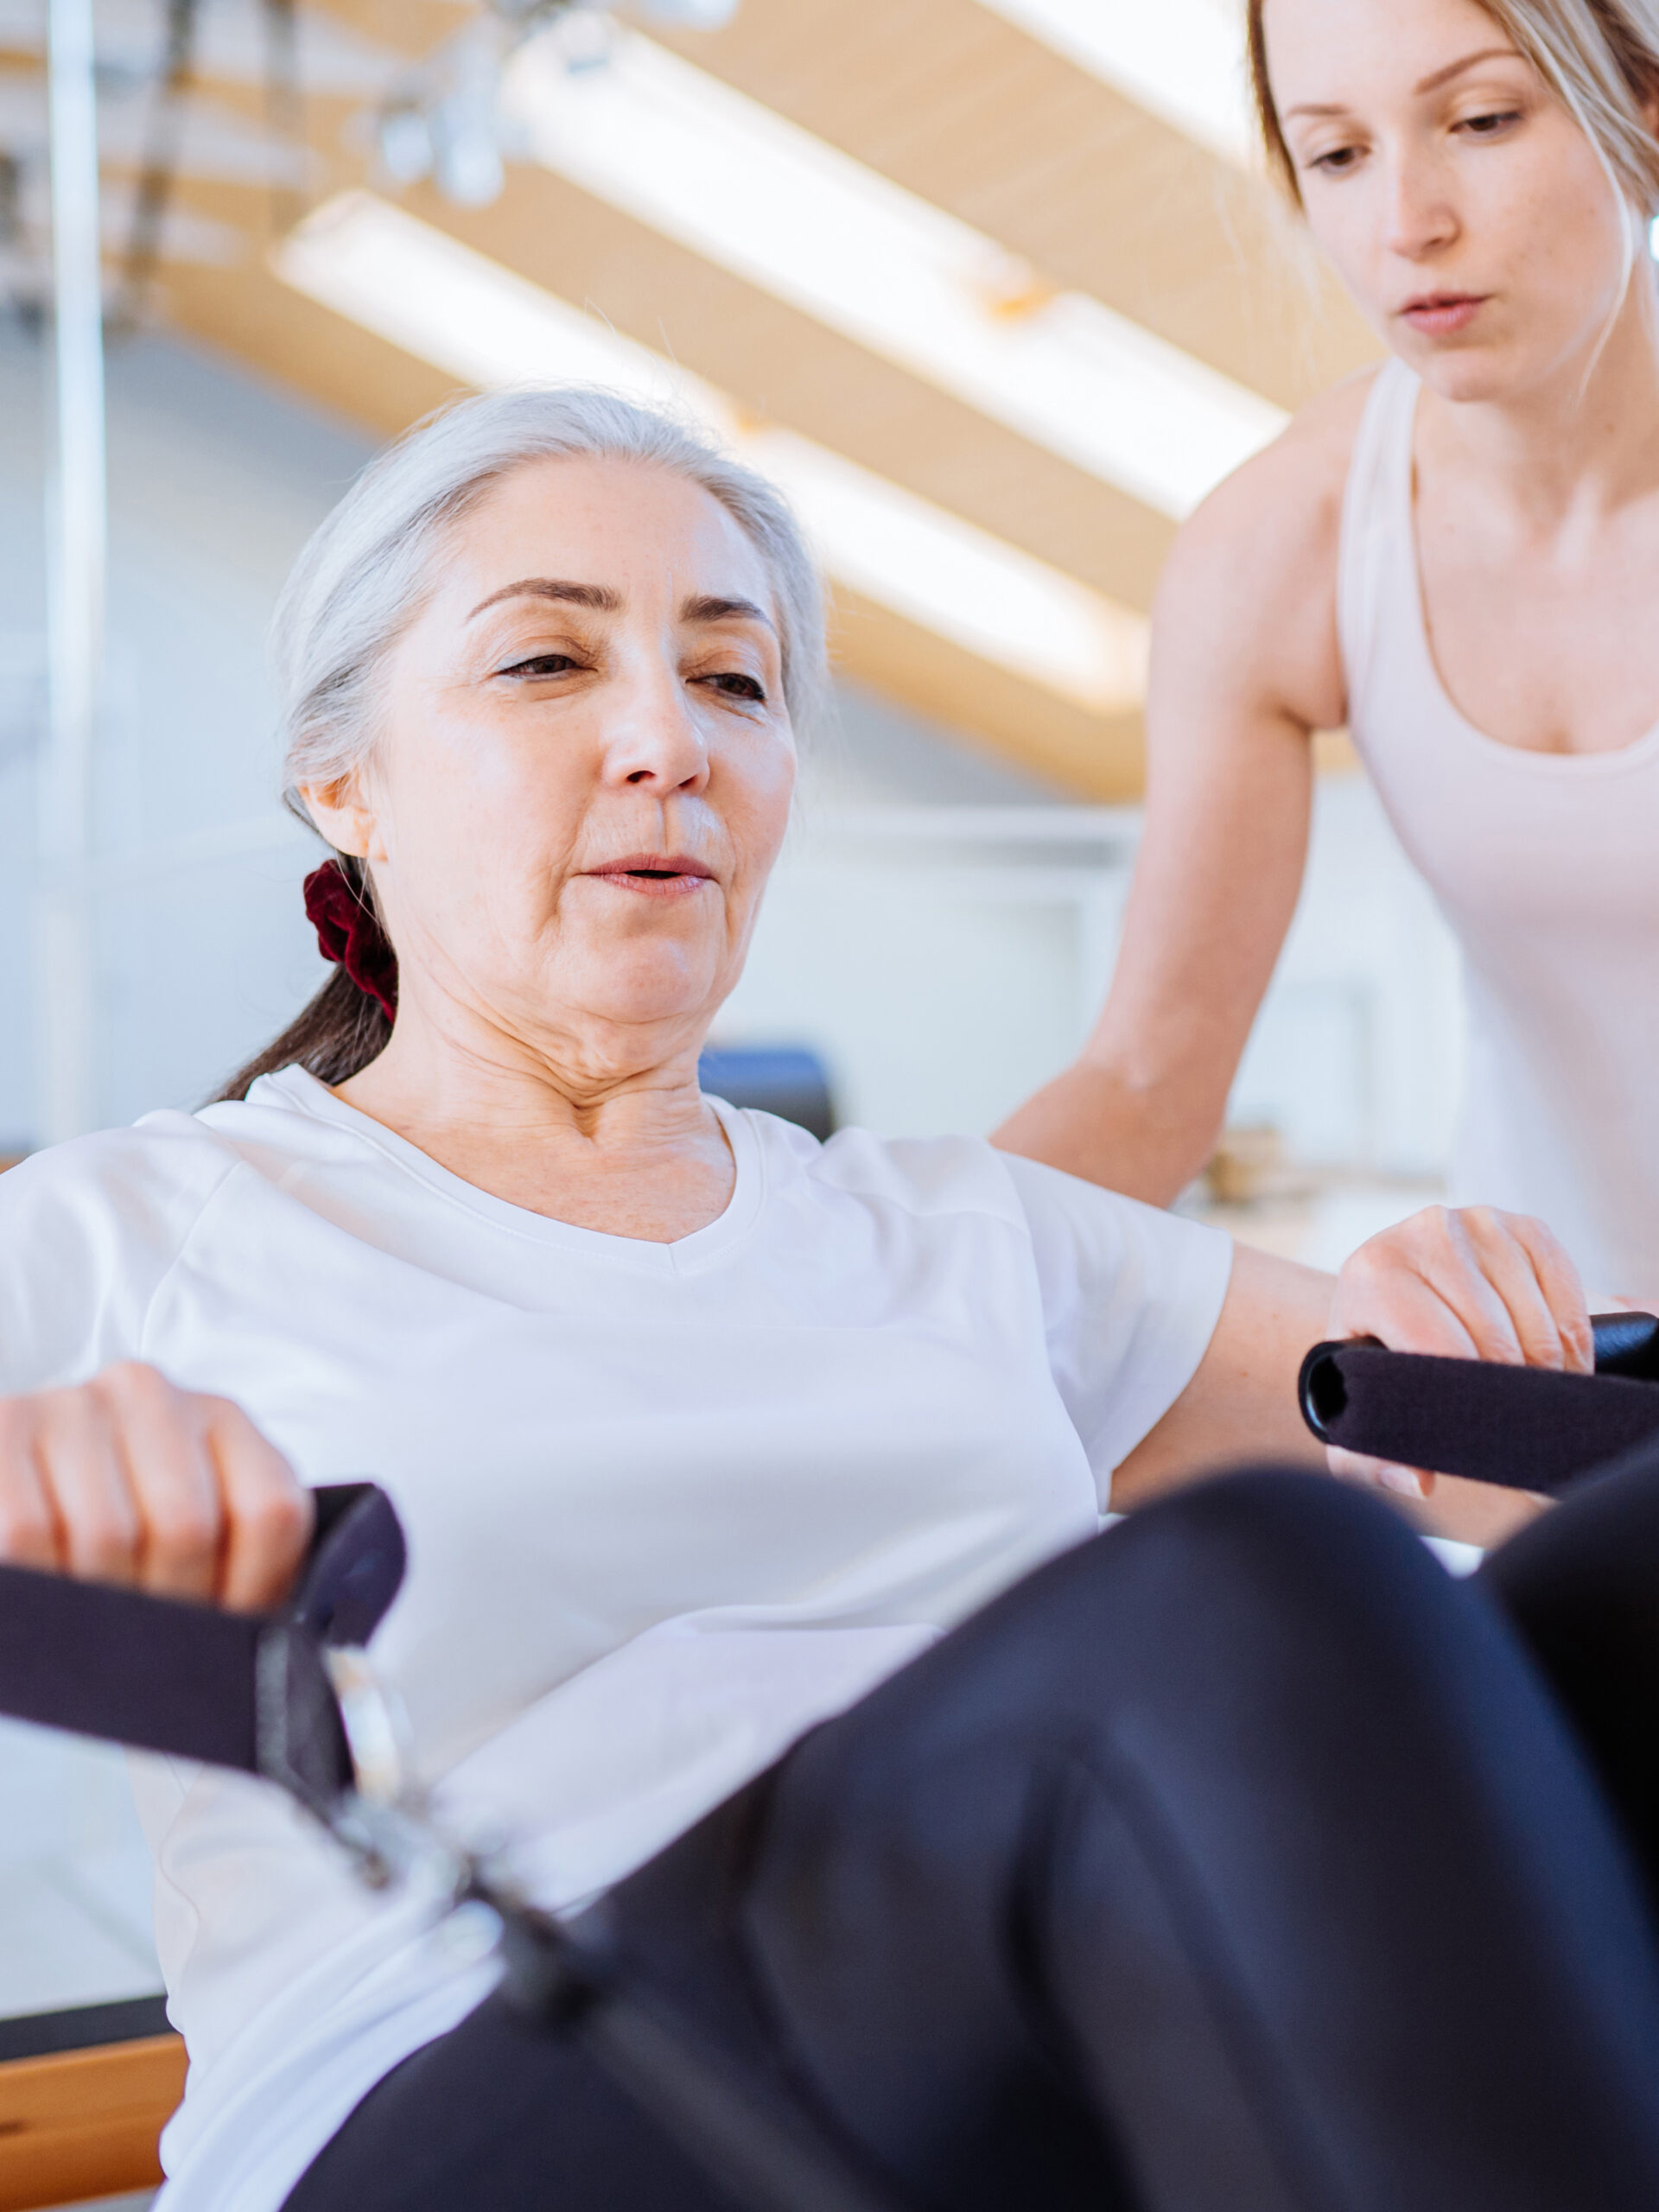 Personal Trainer Assist Senior Woman Exercising On Machine At Gym